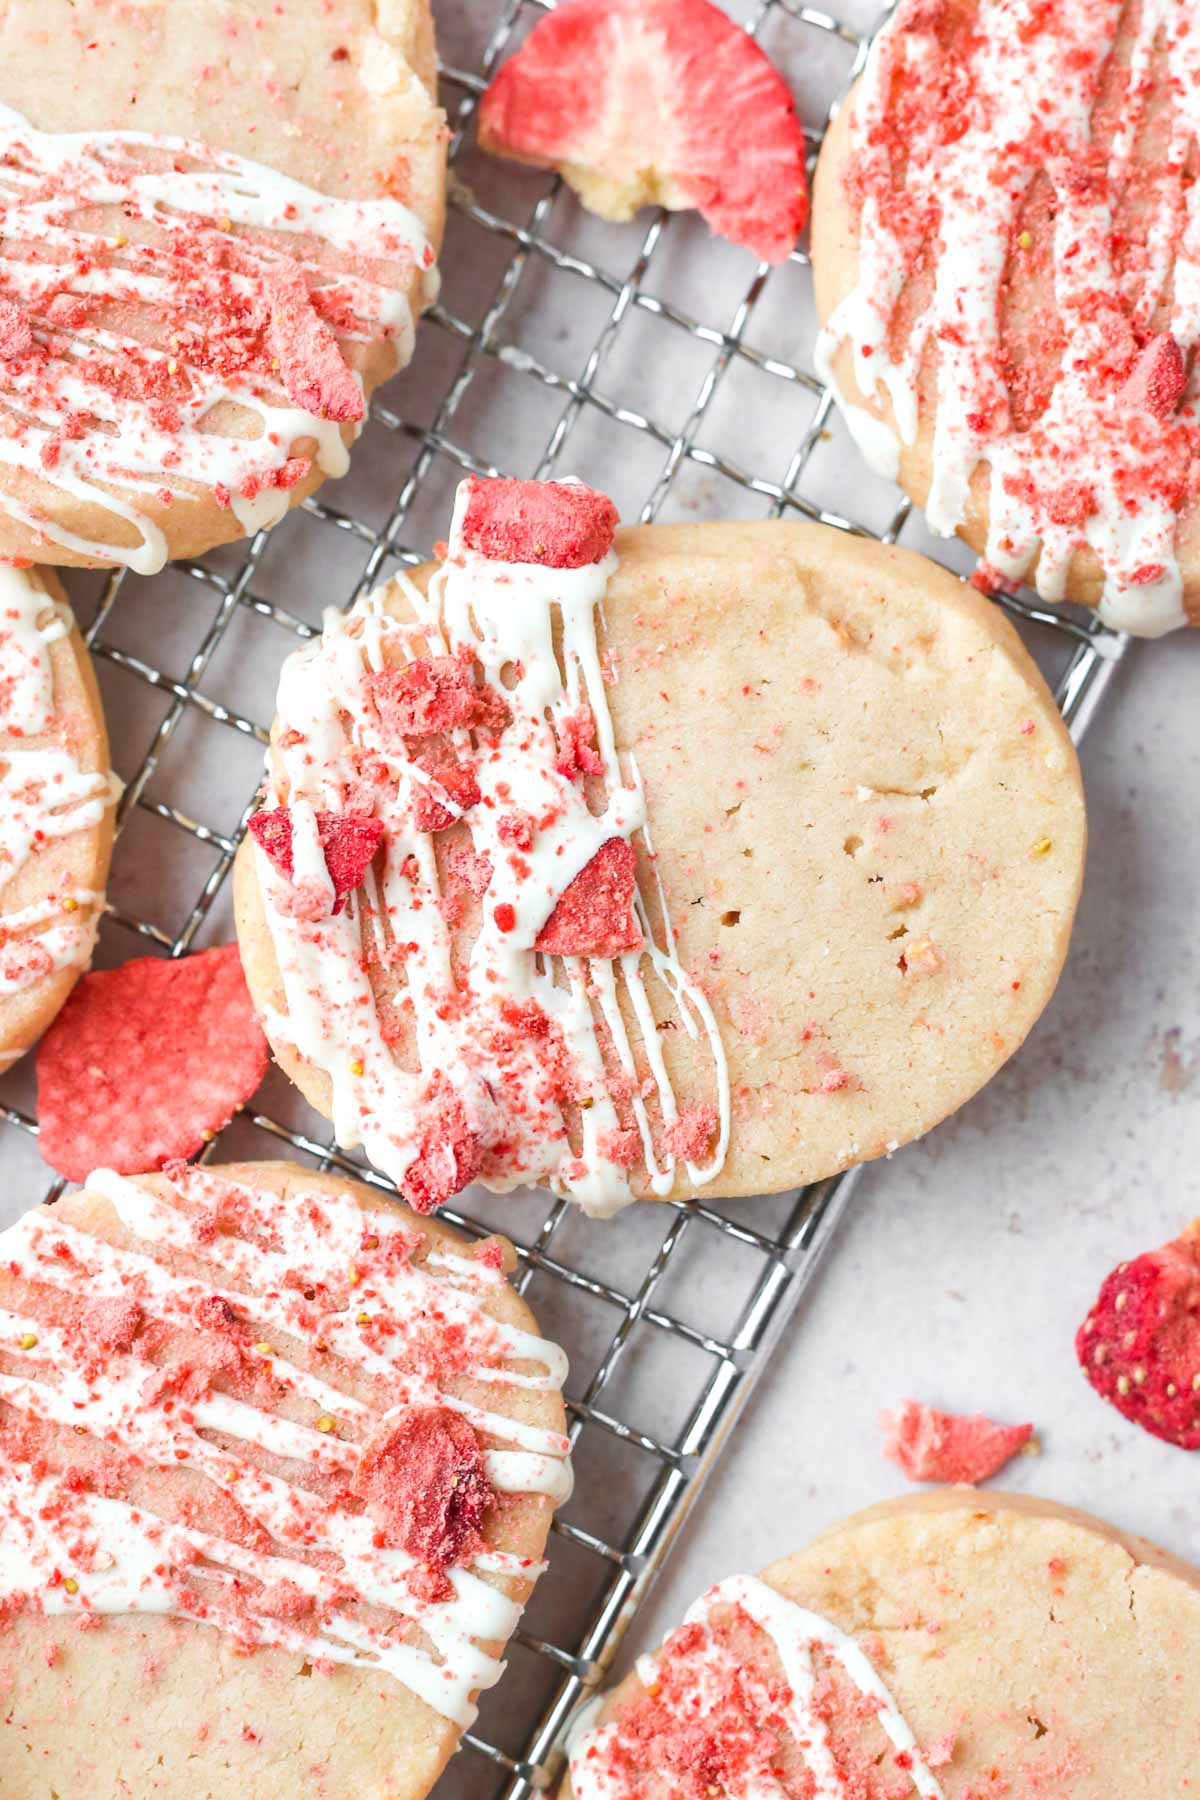 Baked shortbread cookie shown from above on a tray with a white chocolate drizzle and freeze-dried strawberries on top.